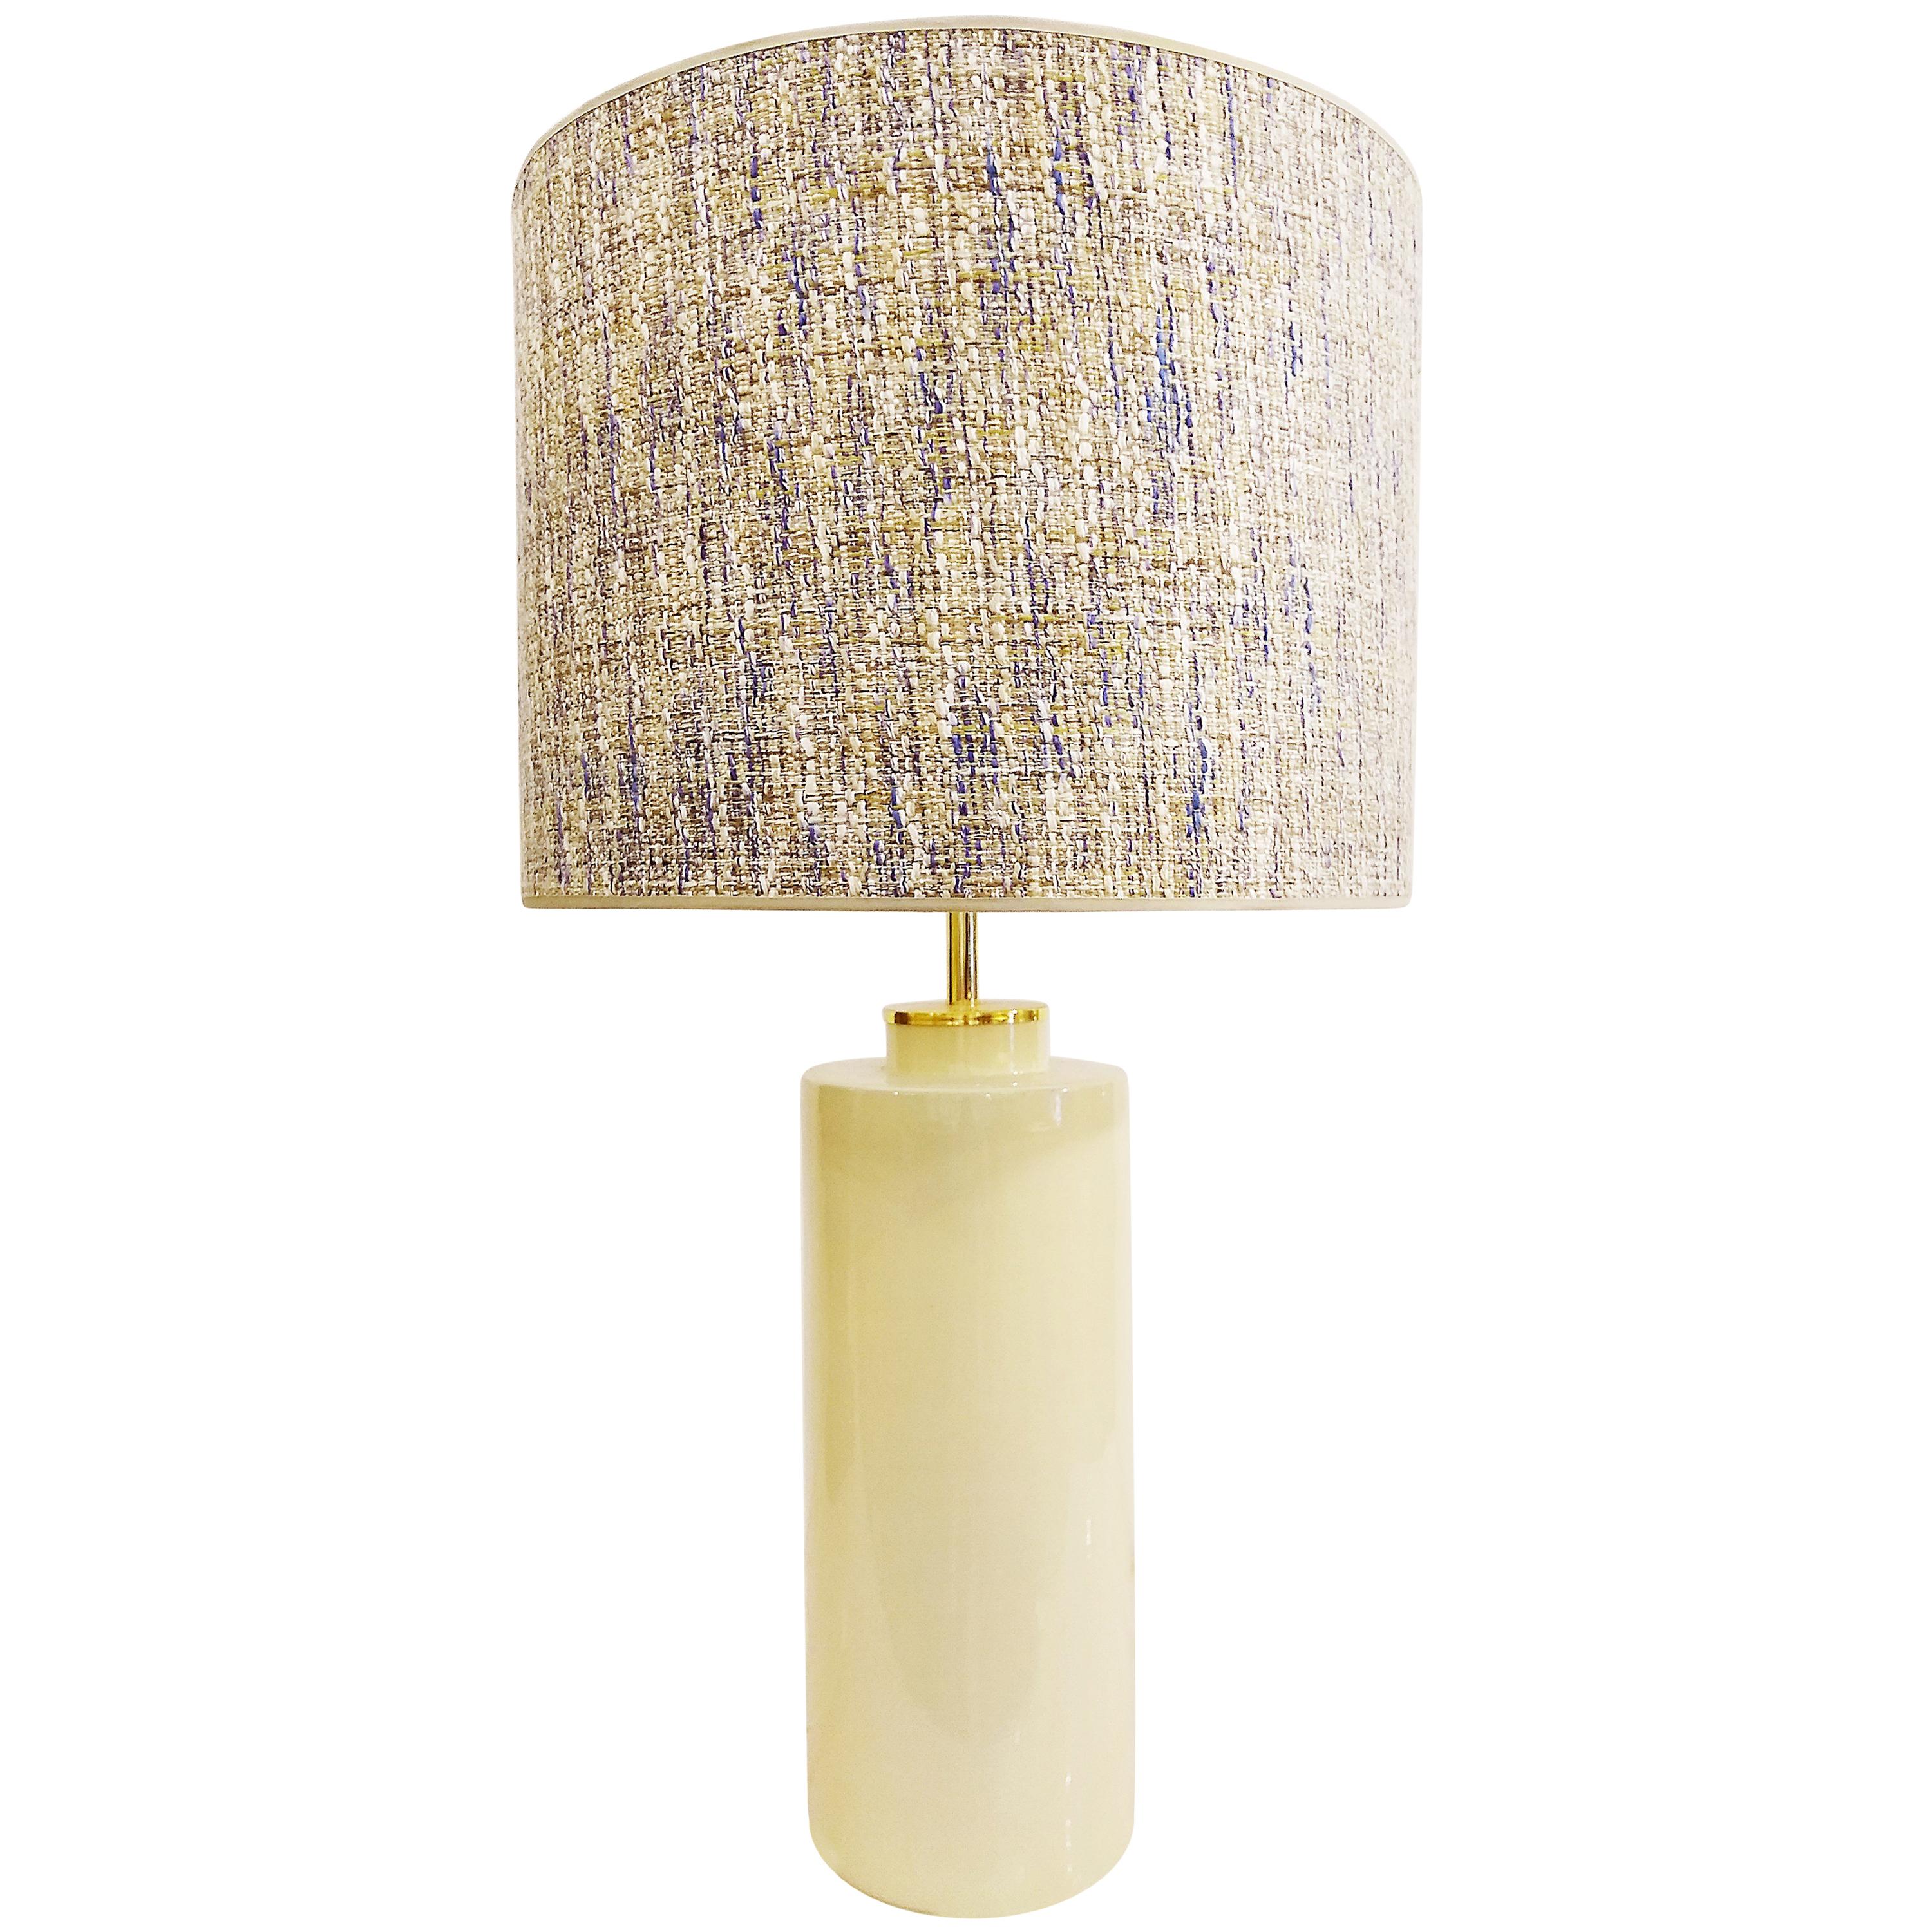 Pale Yellow Pastel Ceramic Pottery Table Lamps, Zaccagnini, Italy